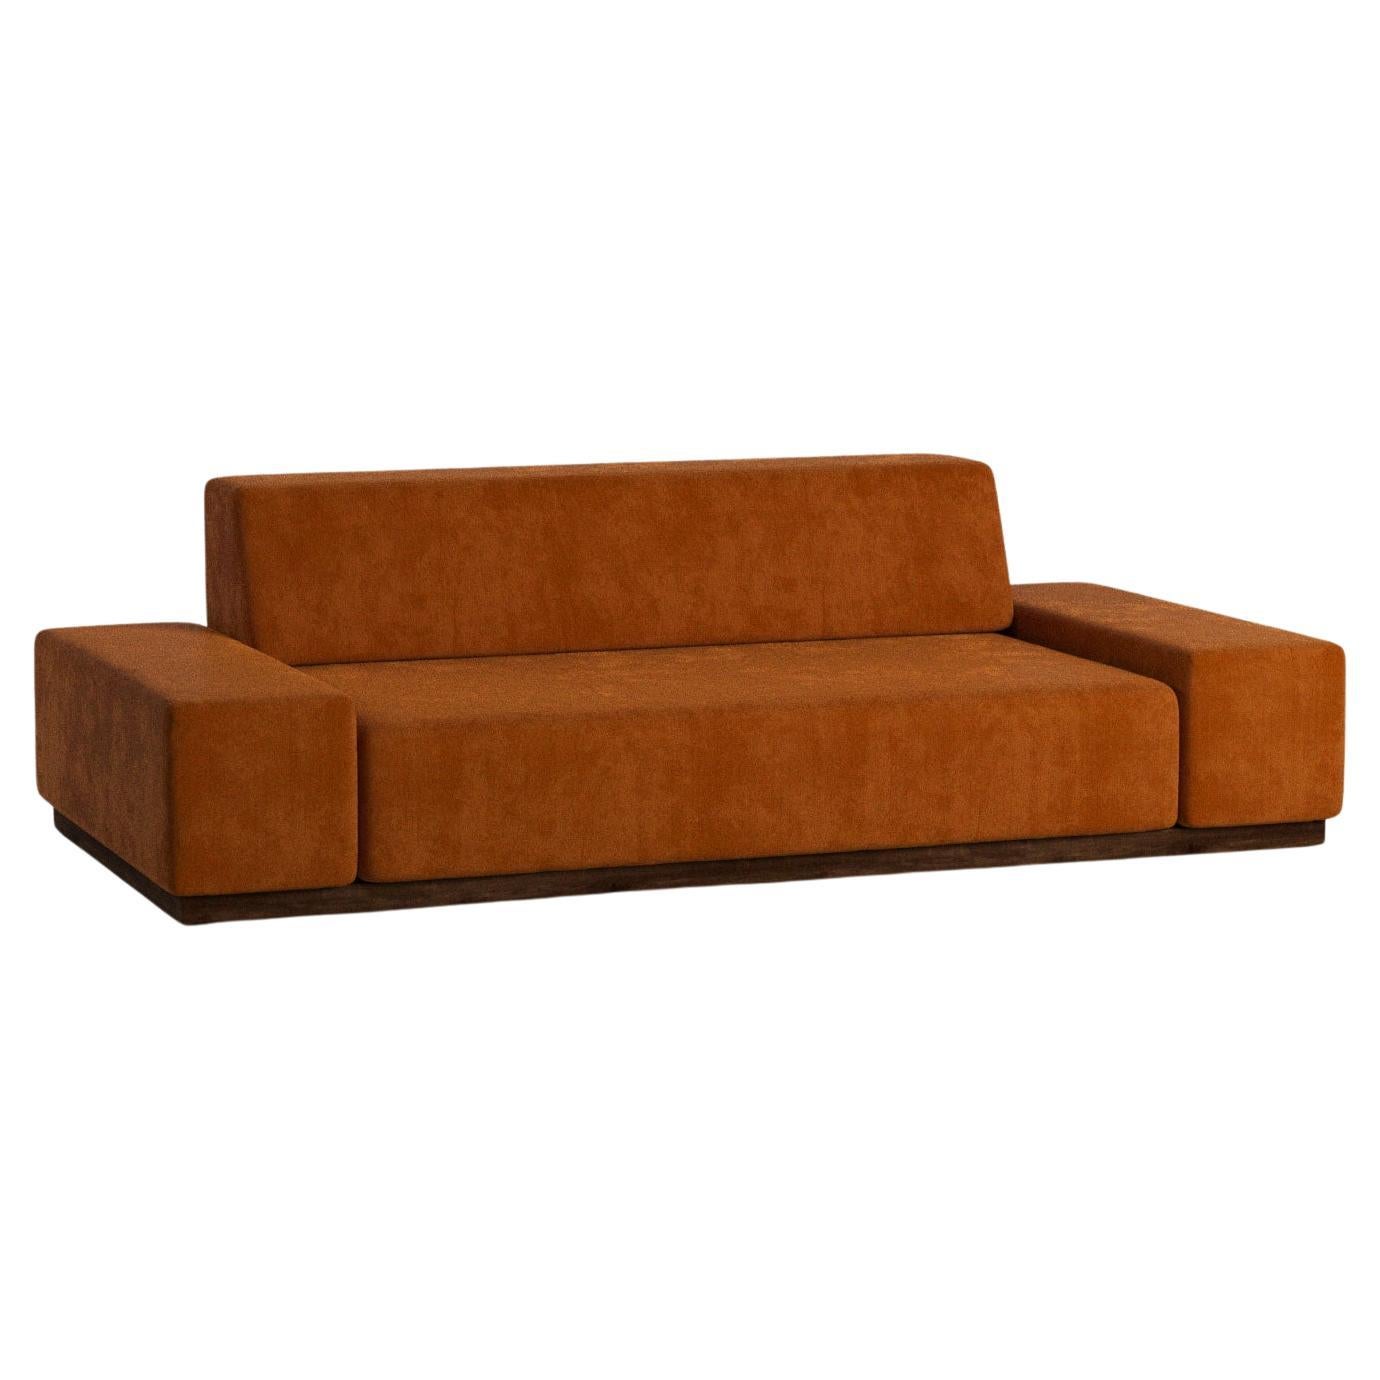 Dune Two Seater Nube Sofa by Siete Studio For Sale